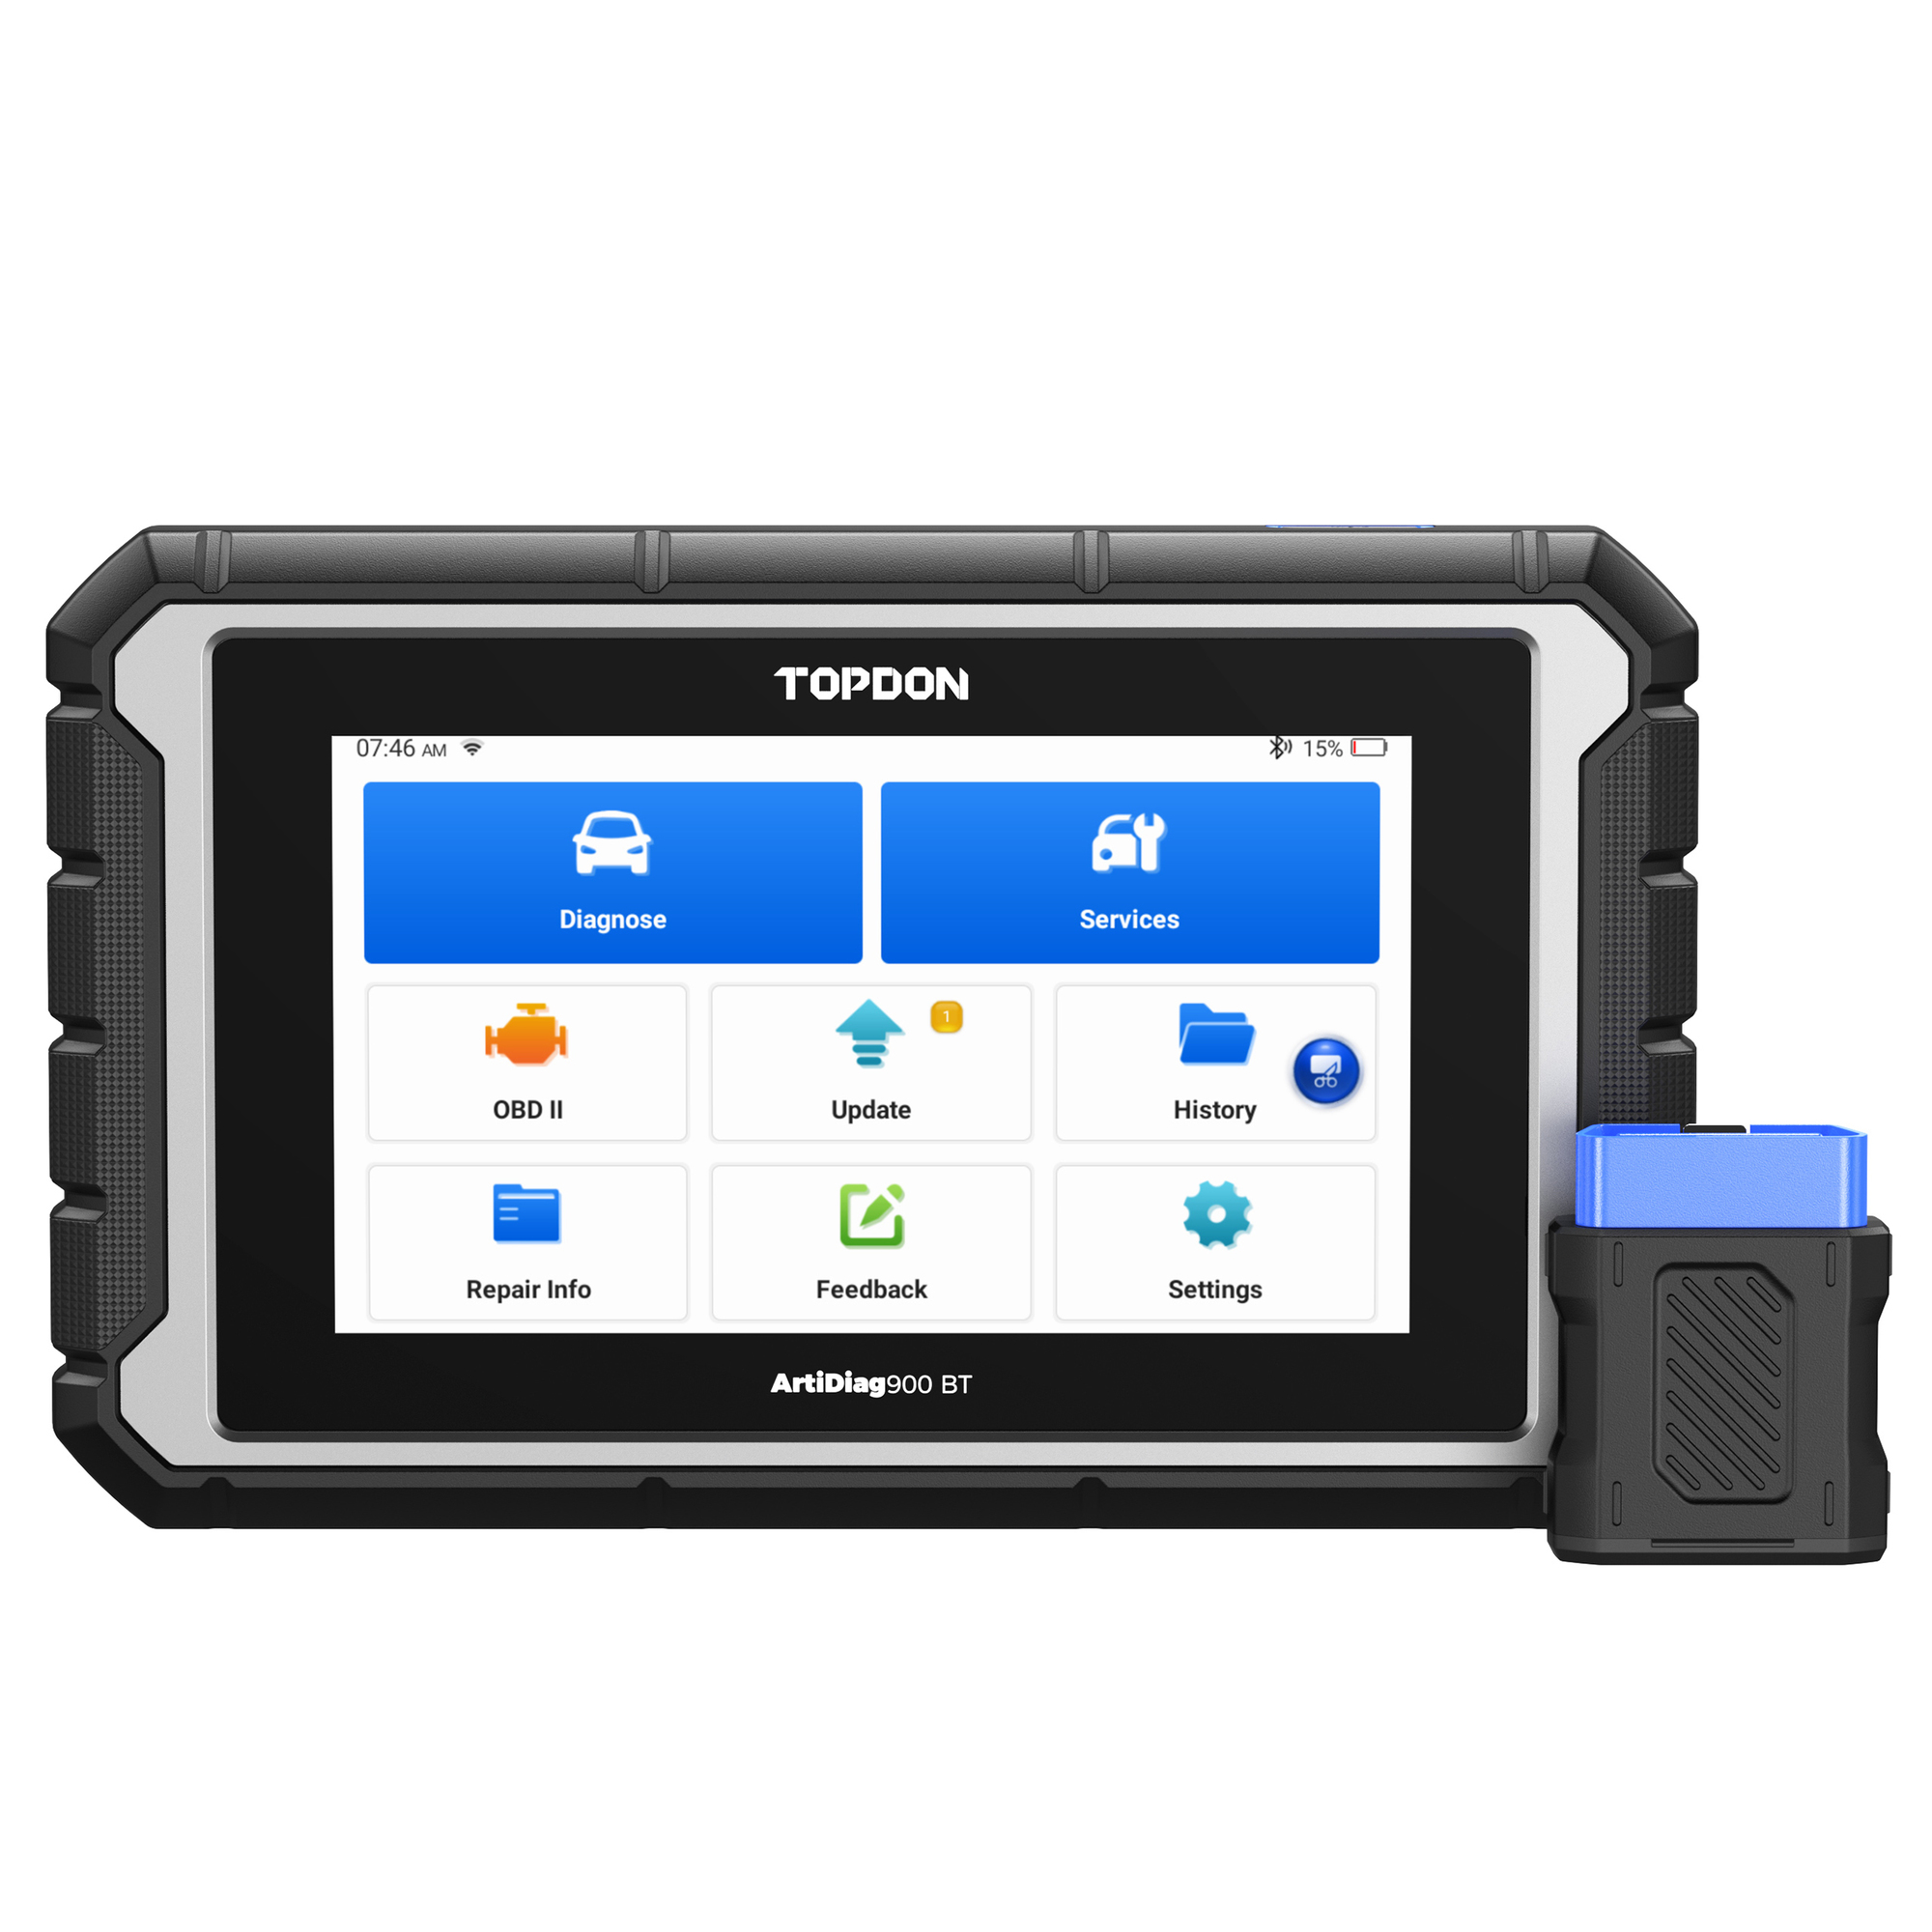 TOPDON, AD900BT Scan Tool 7Inch Tablet w/28 Service Functions, Model AD900BT